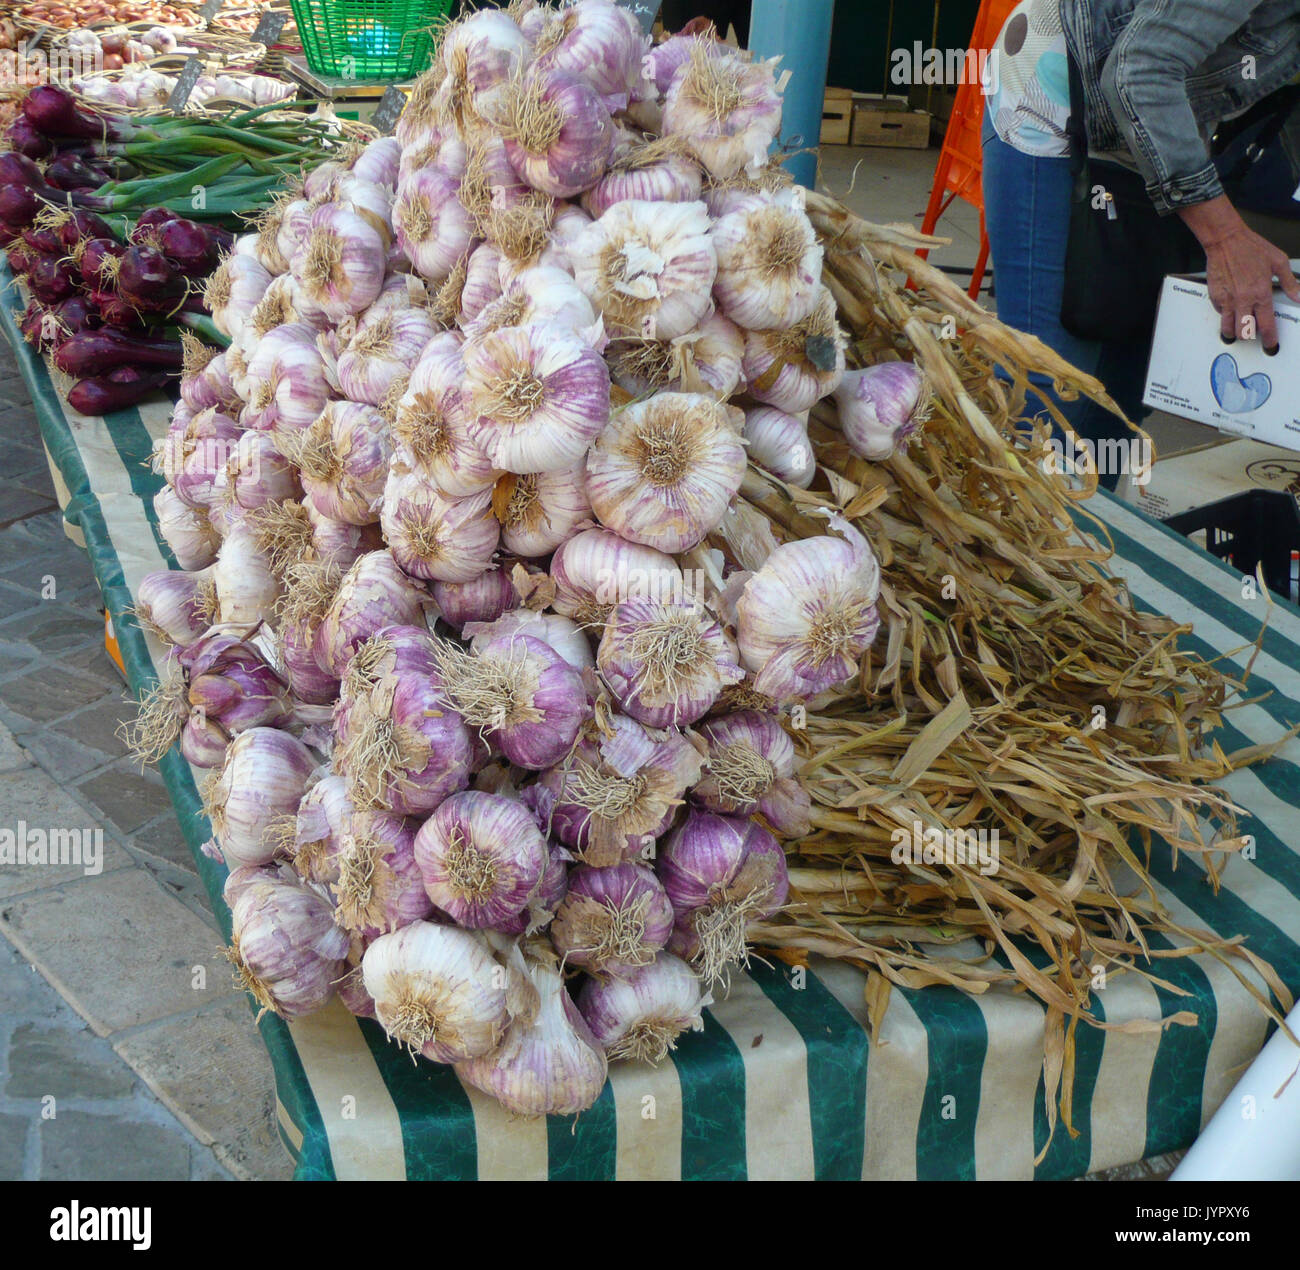 Garlic bulbs for sale in French market Stock Photo